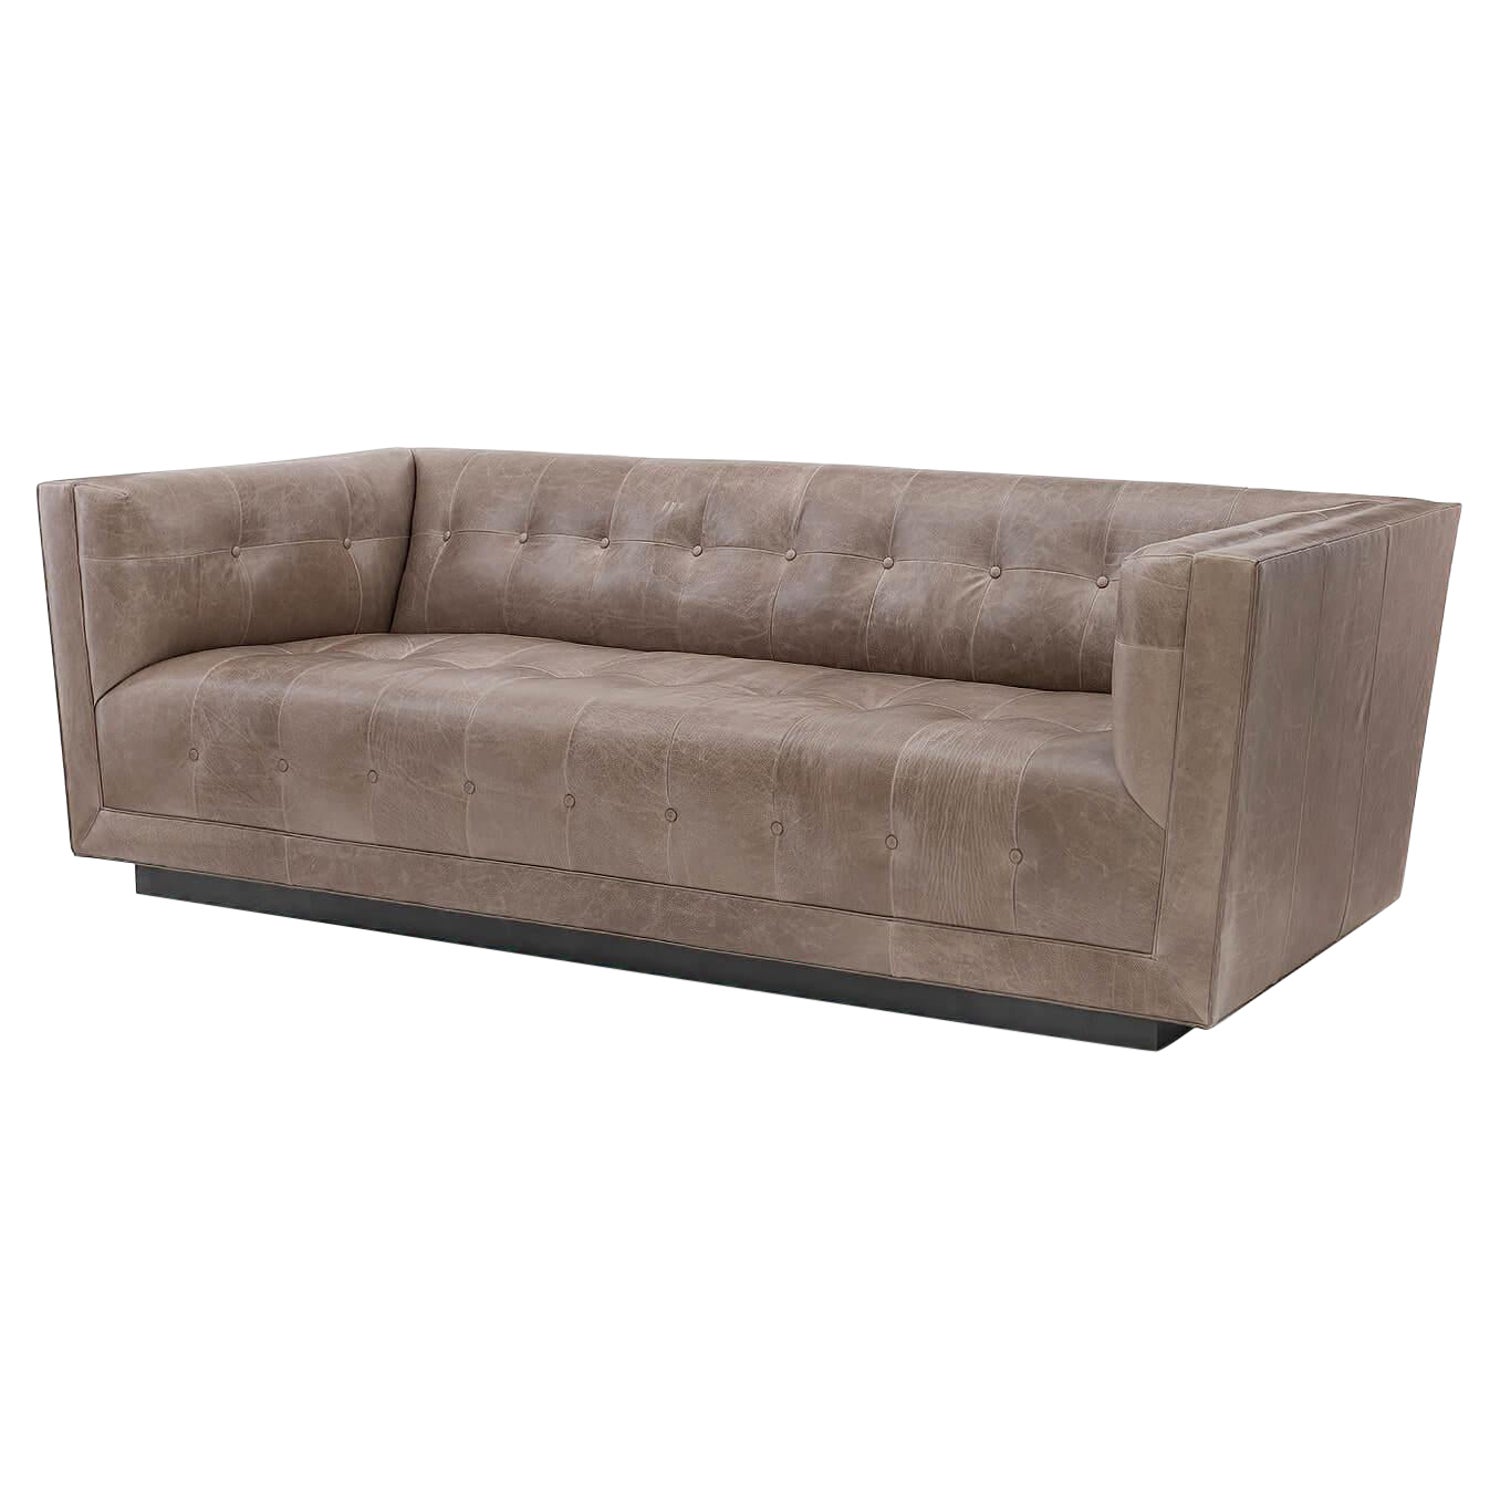 Modern Classic Beveled Leather Sofa For, Classic Leather Couches